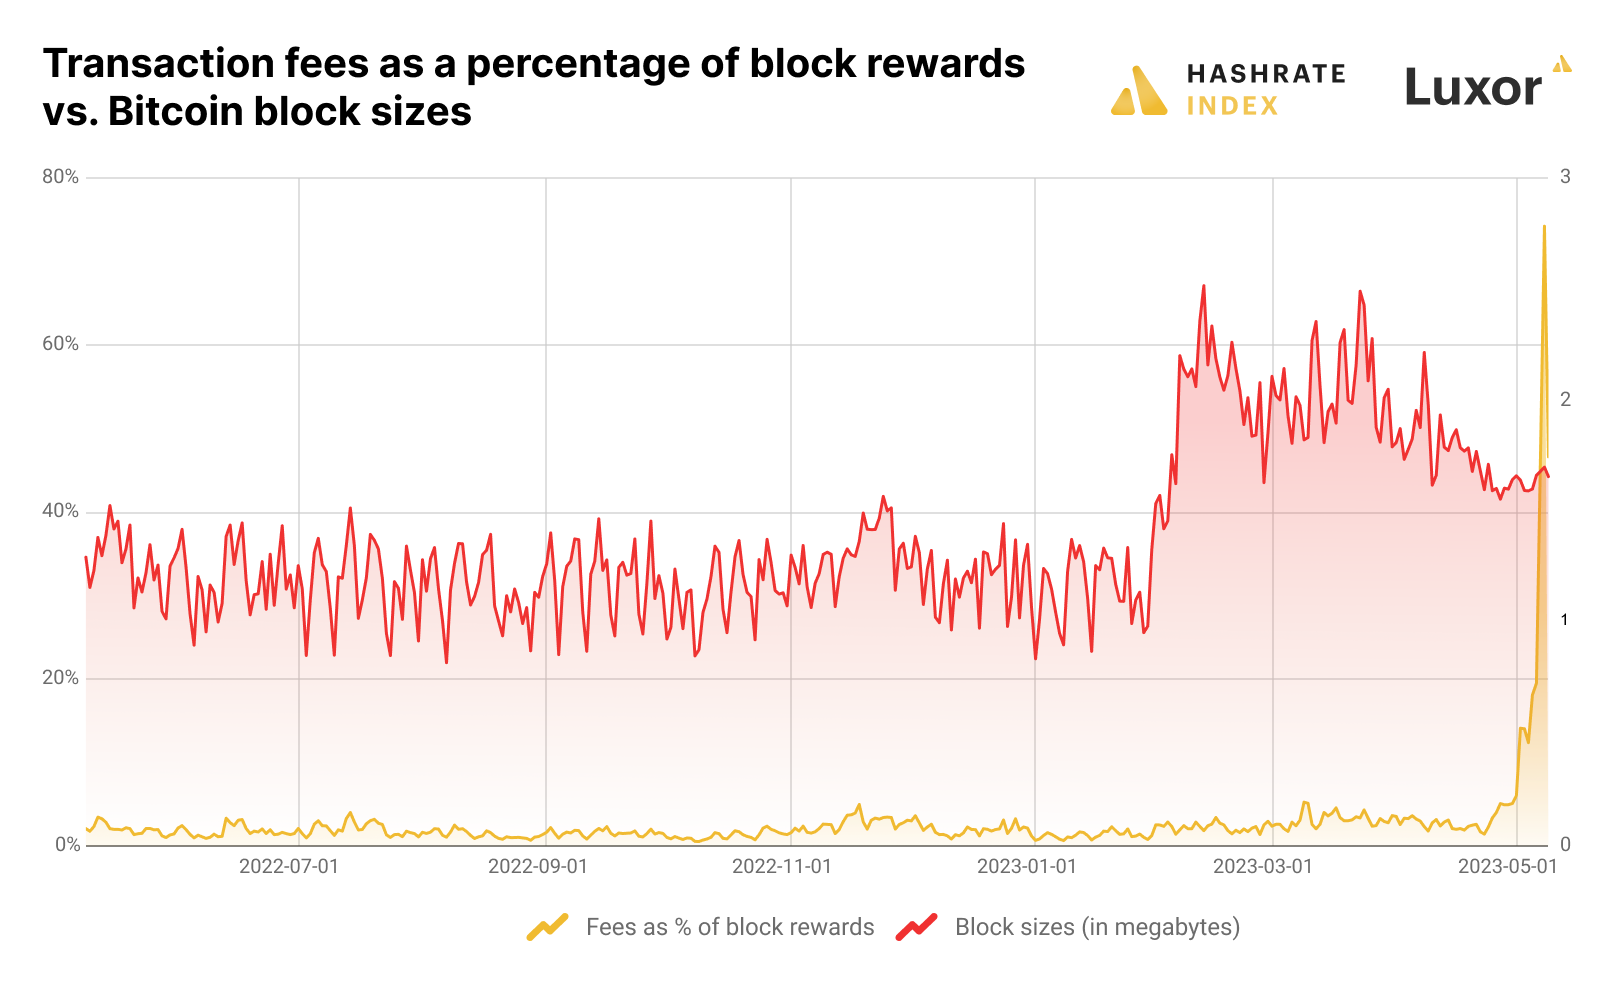 Bitcoin transaction fees as a percentage of block rewards and Bitcoin block sizes 